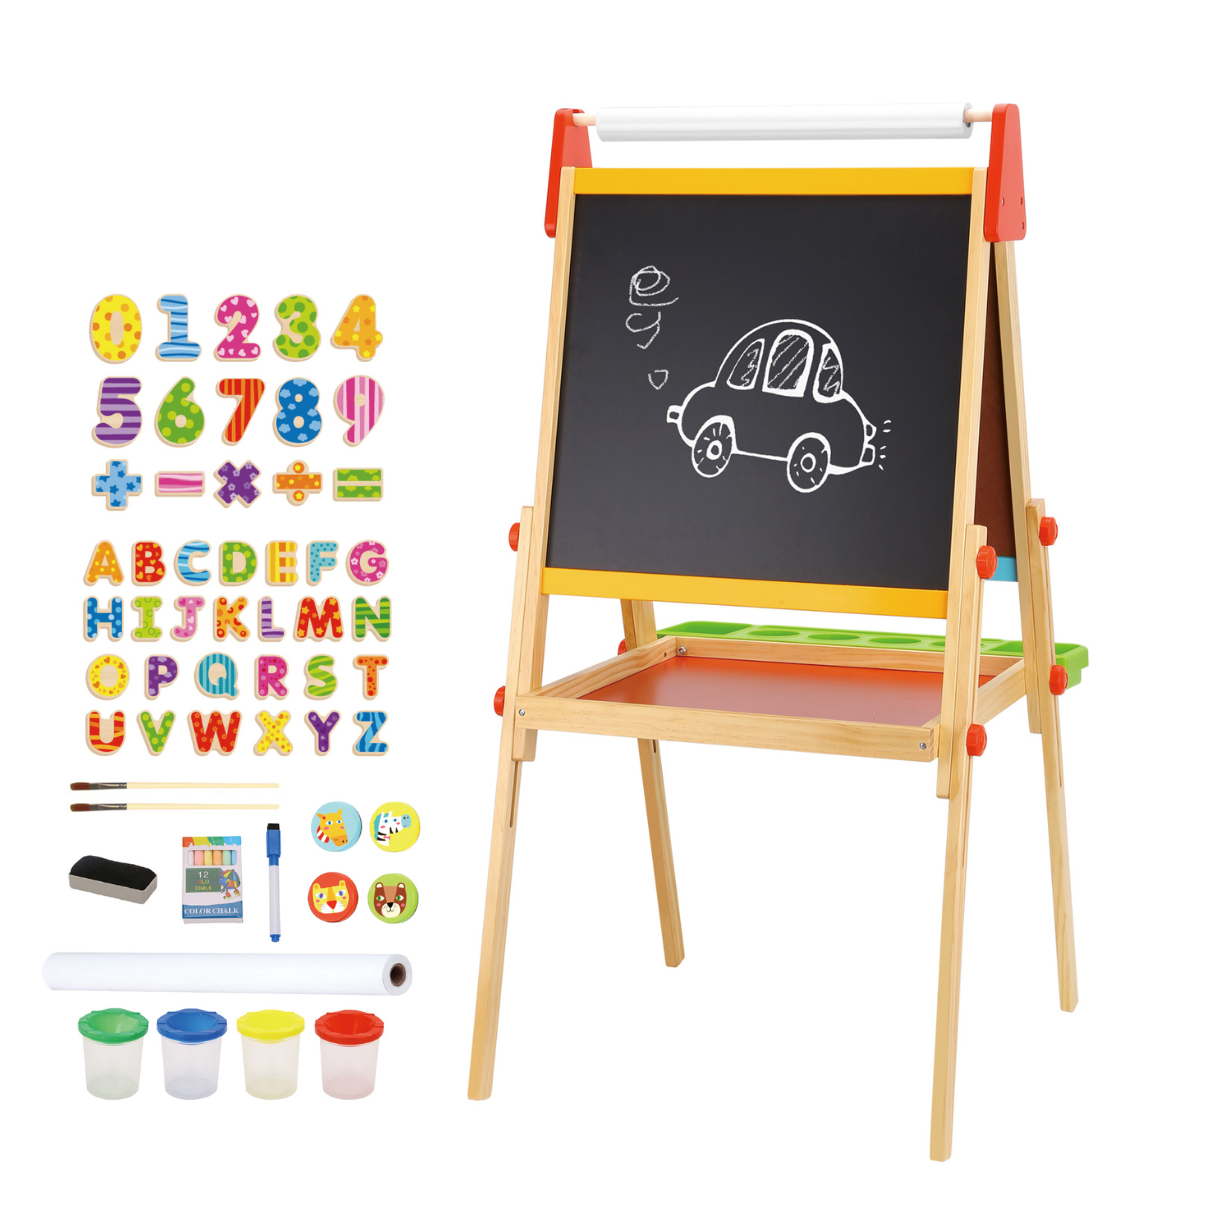 Tooky Toy Wooden Standing Art Easel (Includes Free Accessories)